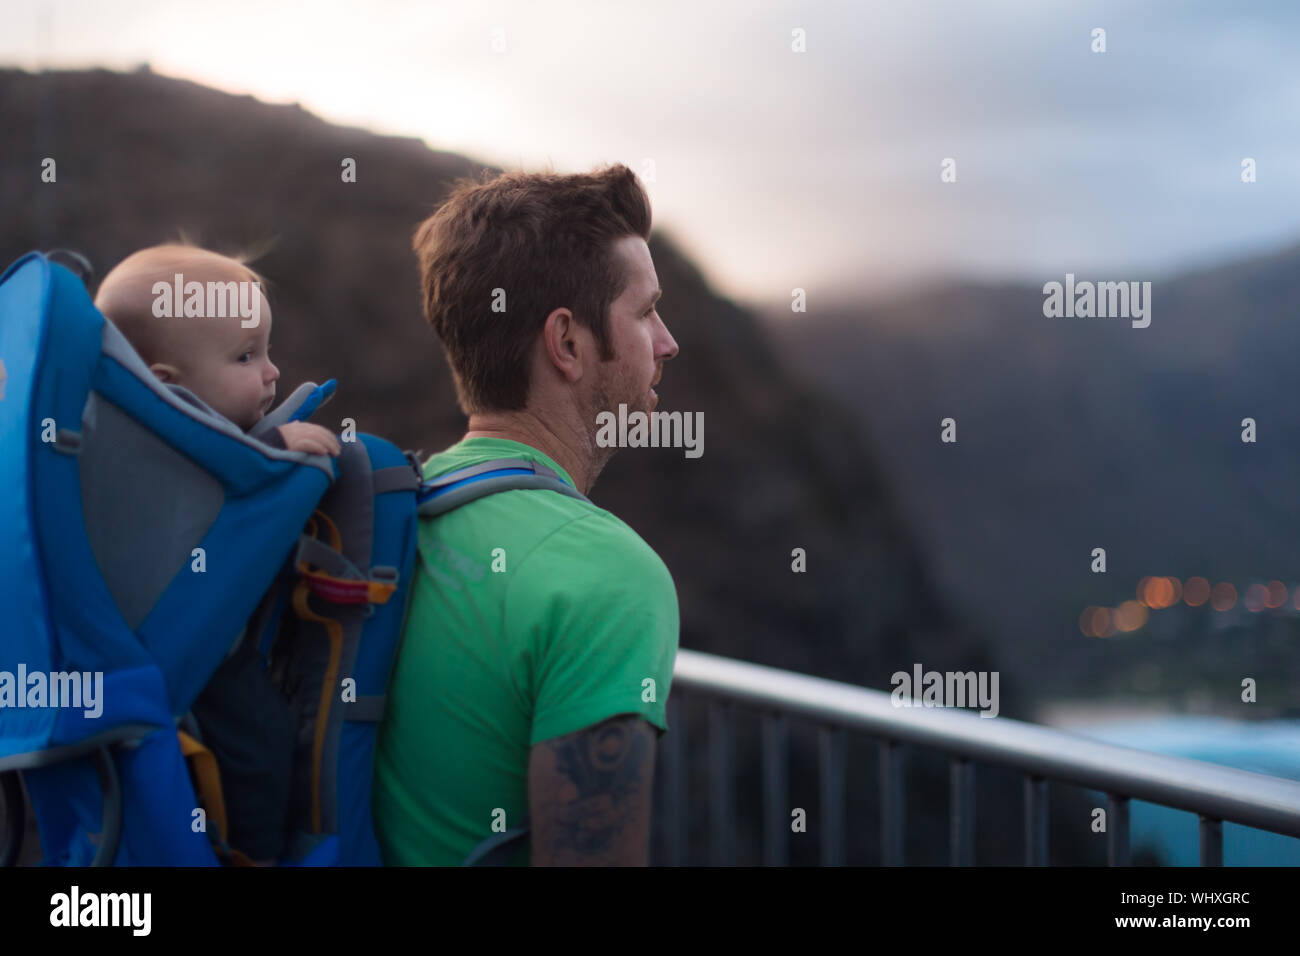 Looking out at a high view after a long hike. Family being active together Stock Photo